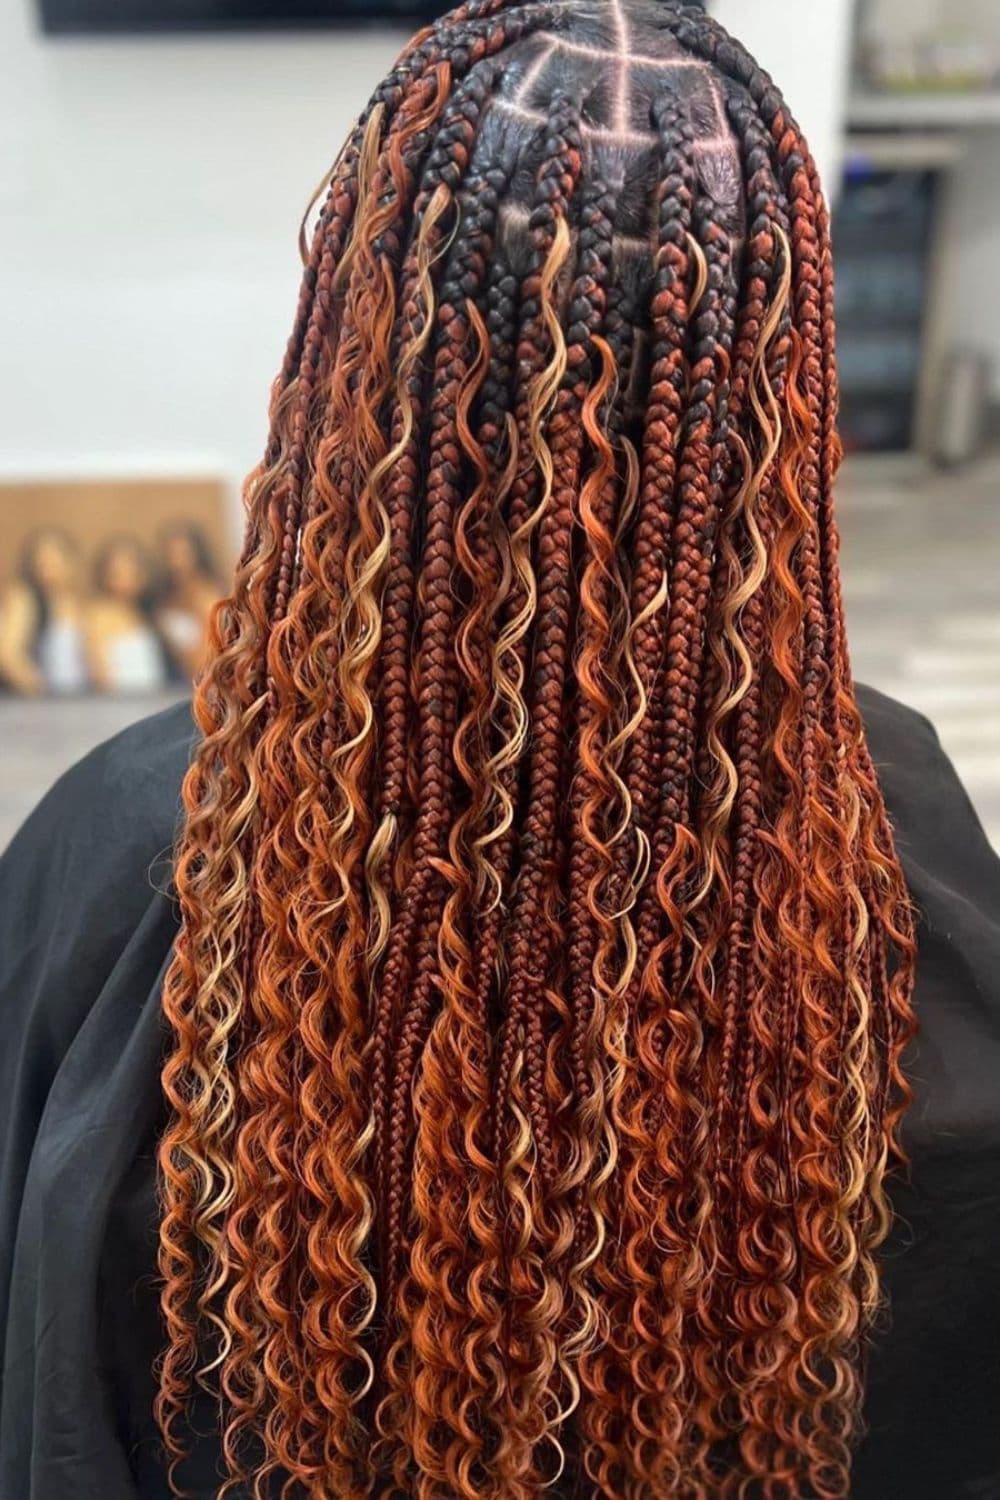 A woman with brown, blonde, and black goddess braids.